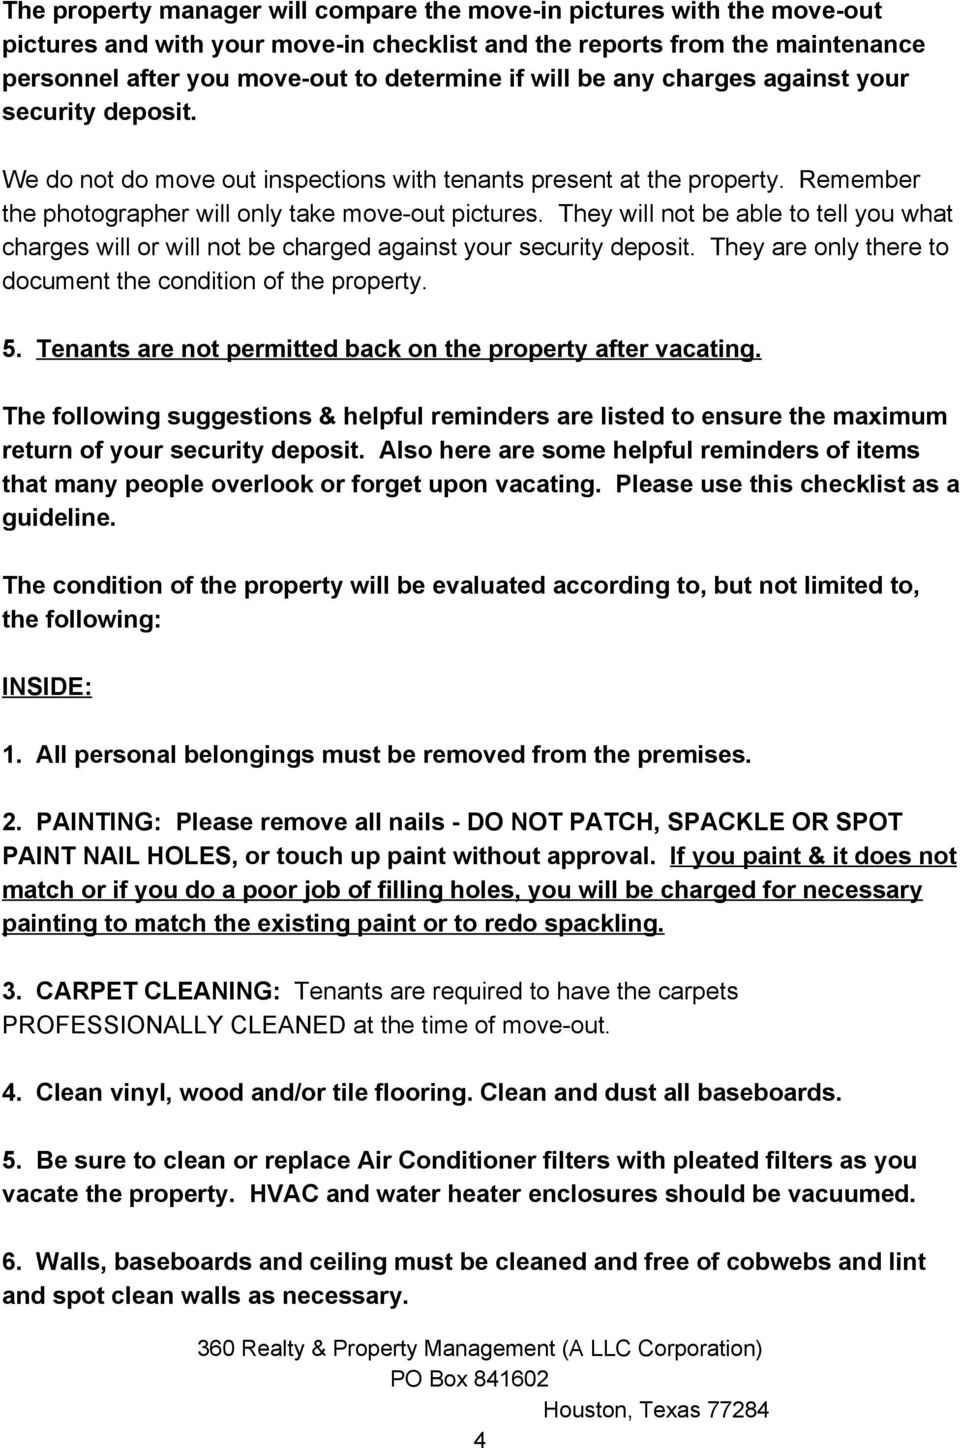 They will not be able to tell you what charges will or will not be charged against your security deposit. They are only there to document the condition of the property. 5.